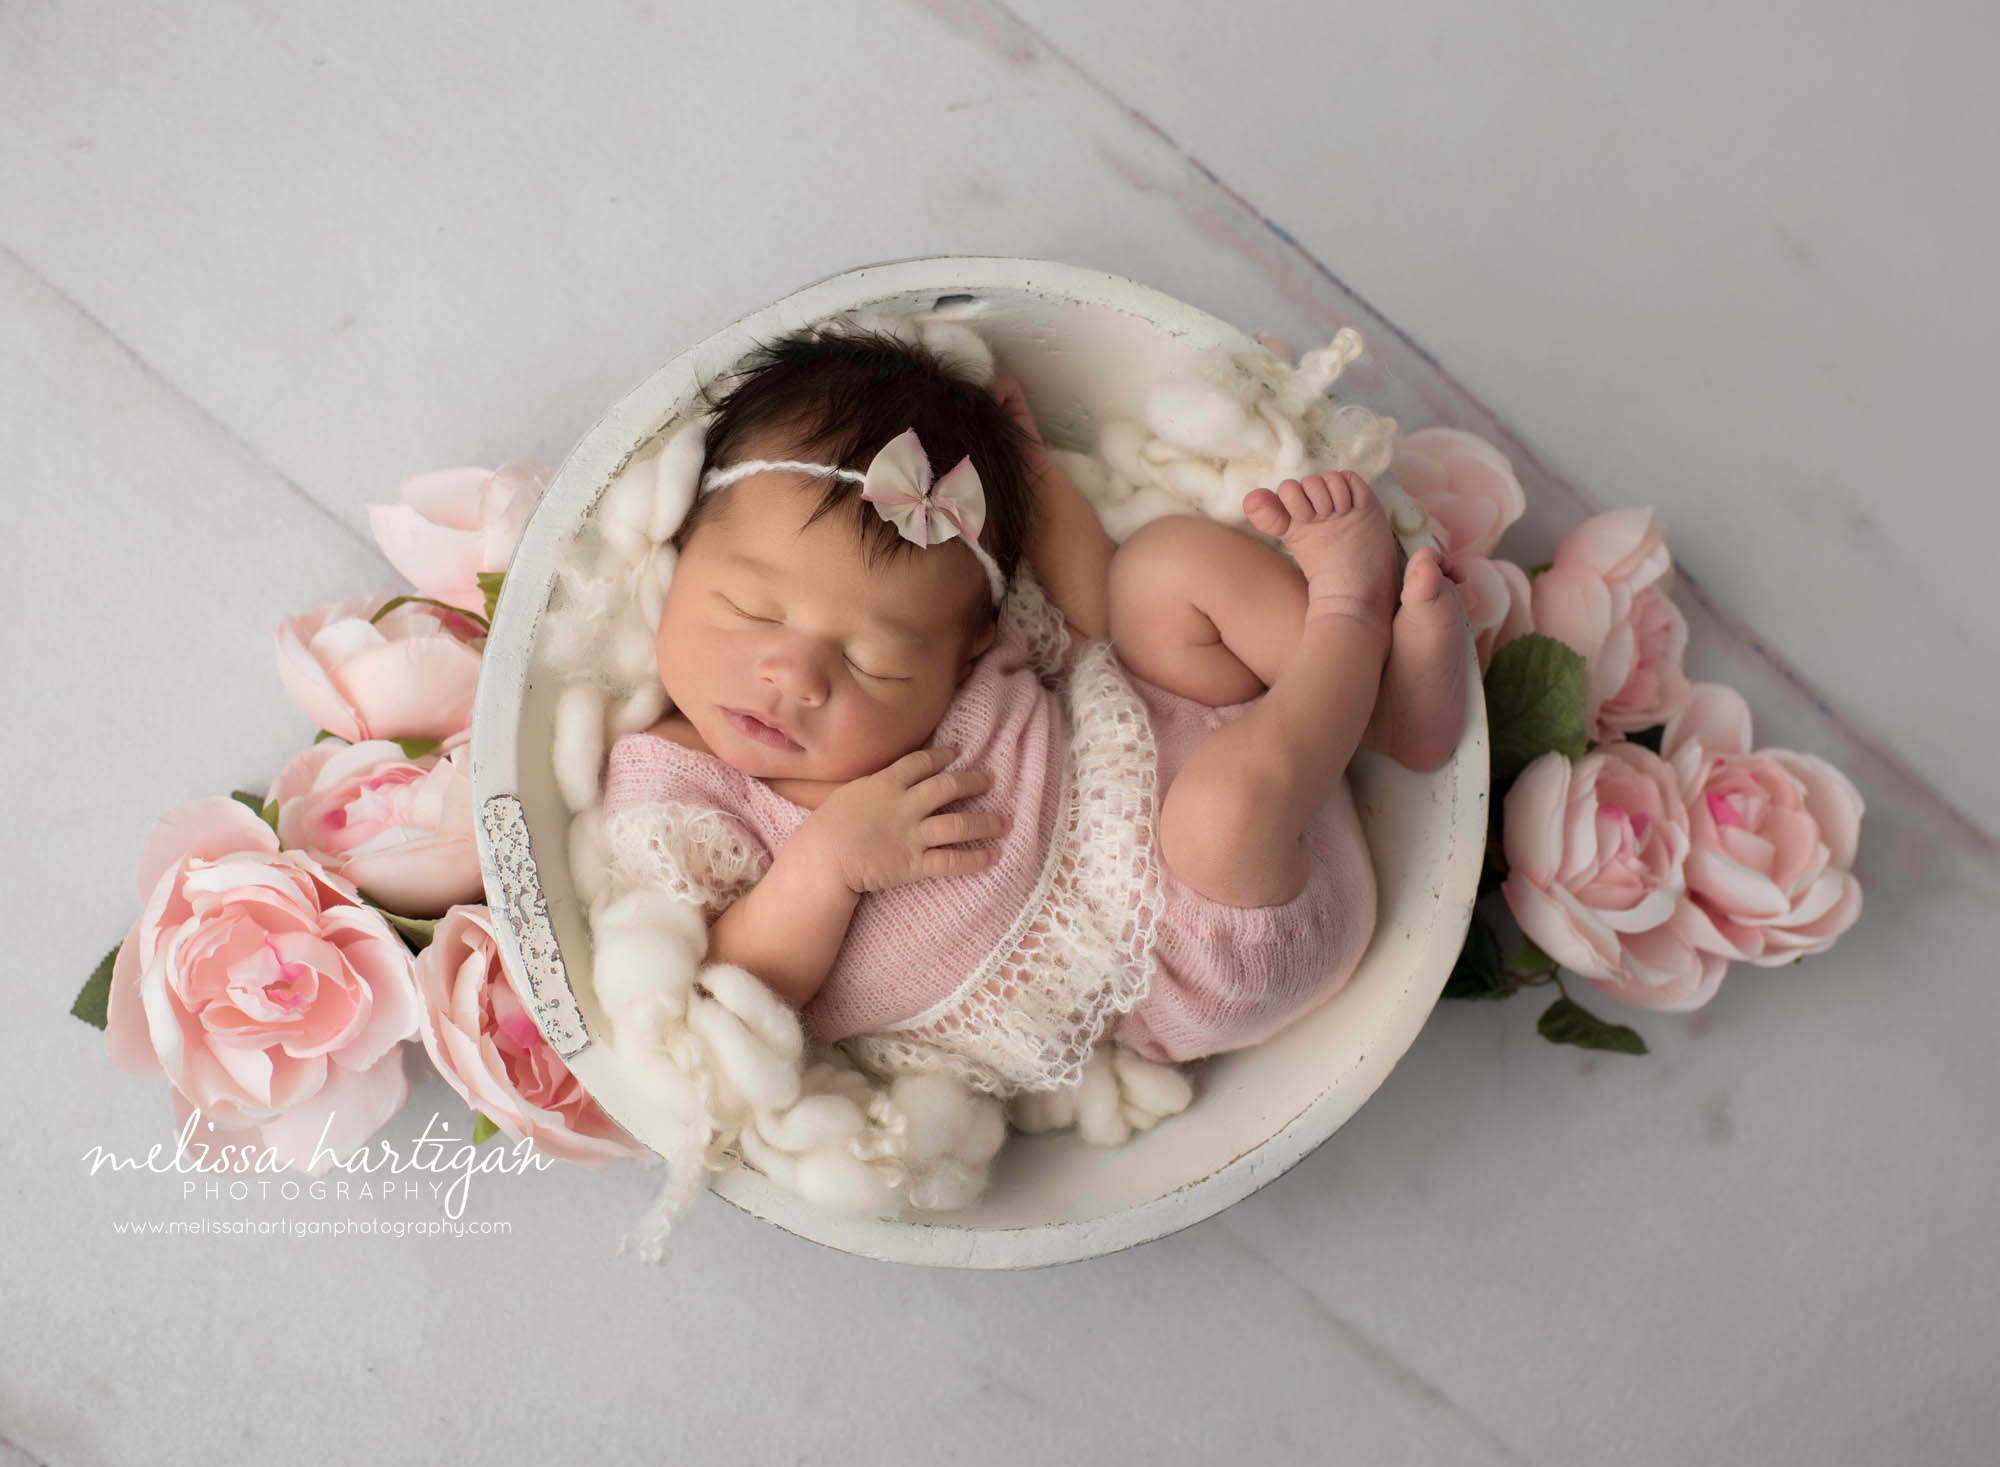 newborn baby girl posed in cream wooden bowl with pink flower bulbs pink knitted outfit and pink bow headband